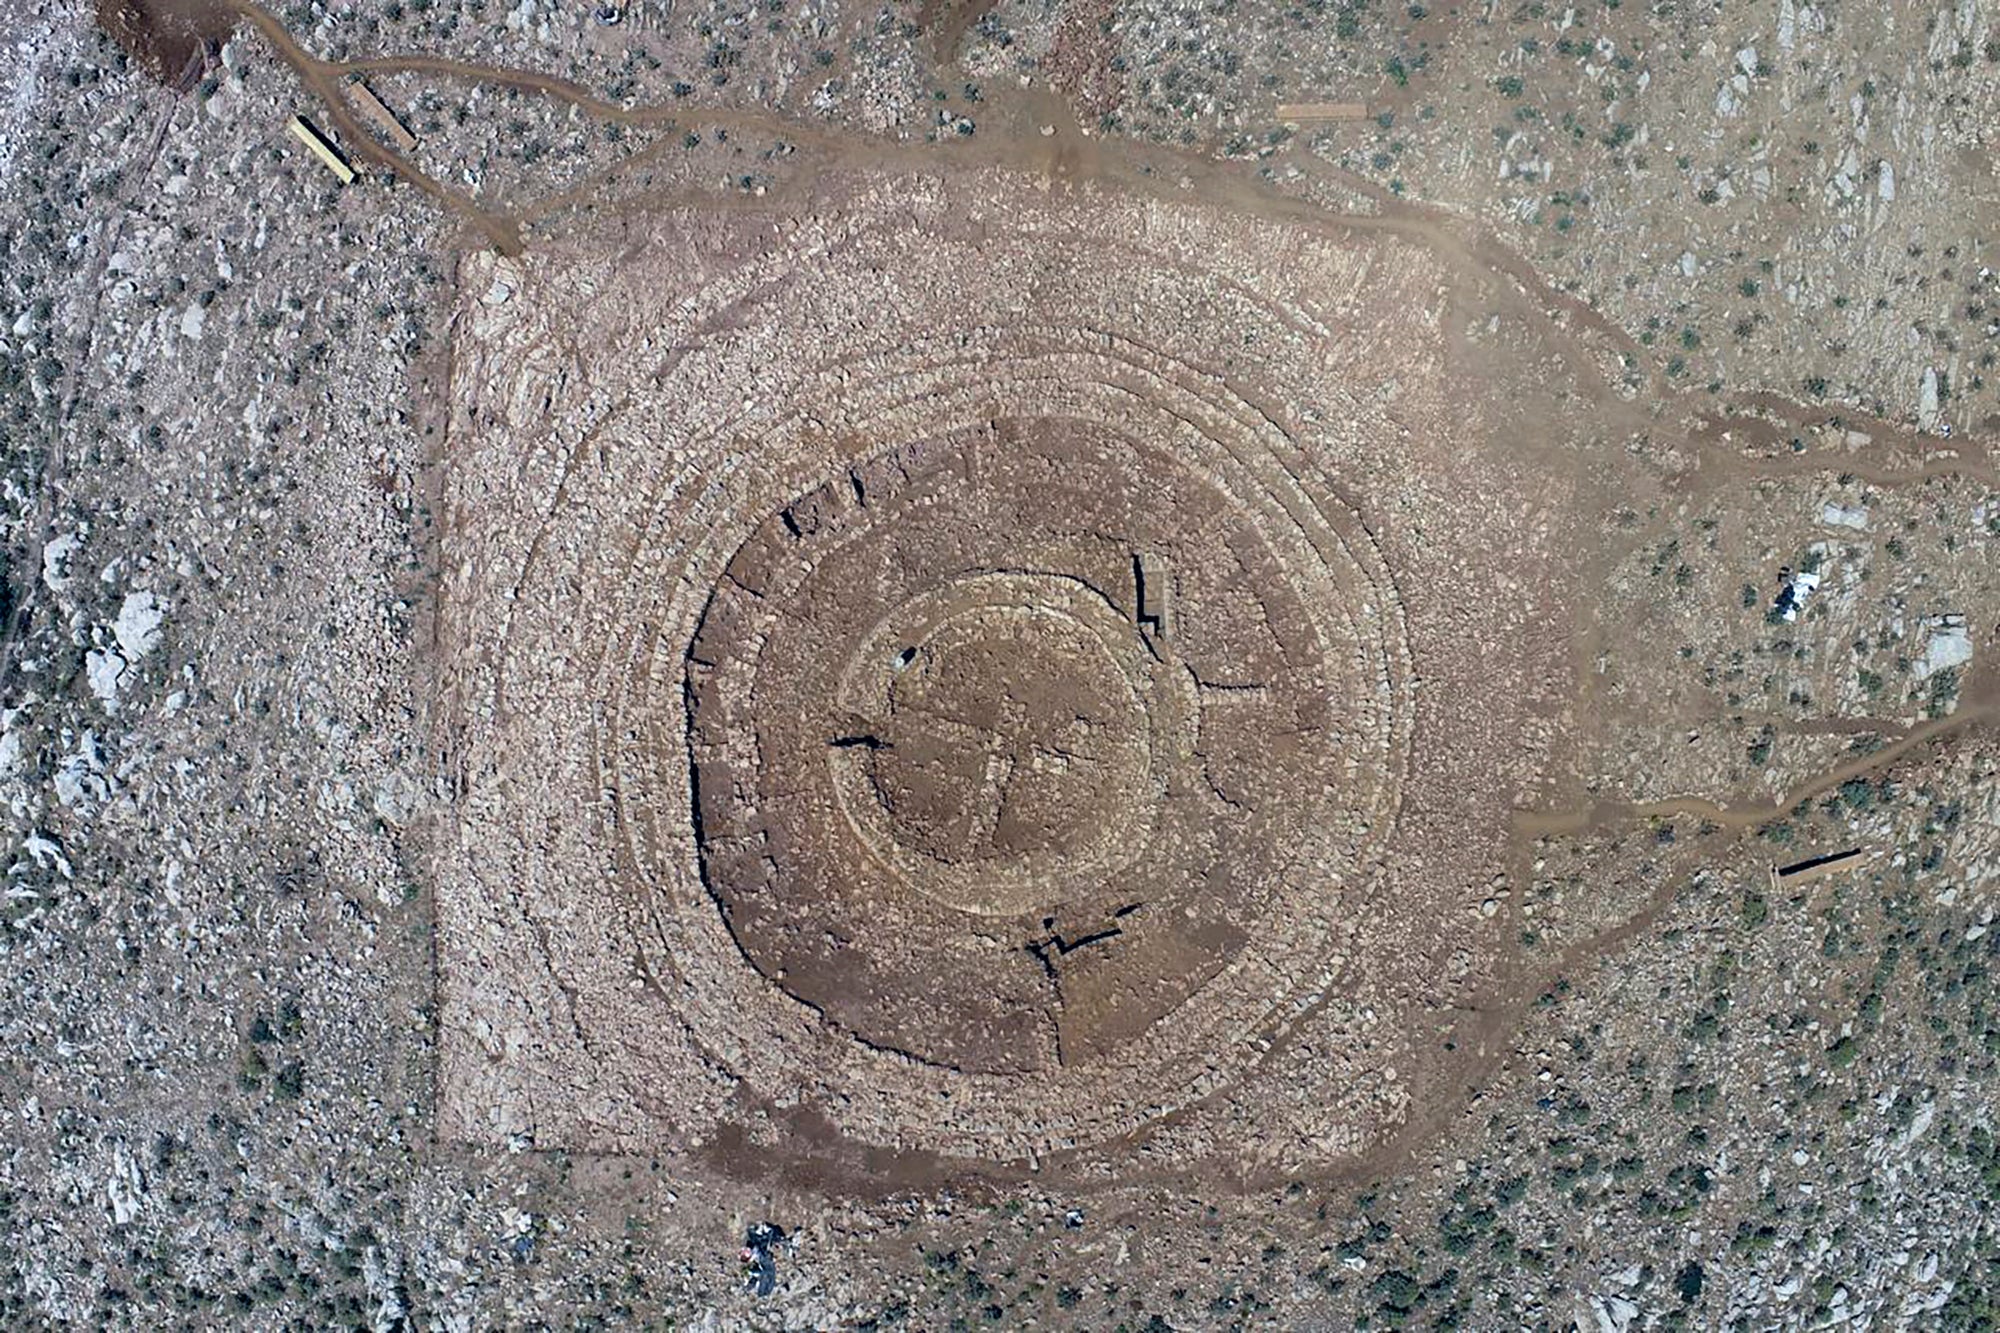 The wheel-shaped structure is puzzling archaeologists and threatening to disrupt a major airport project on the tourism-reliant island